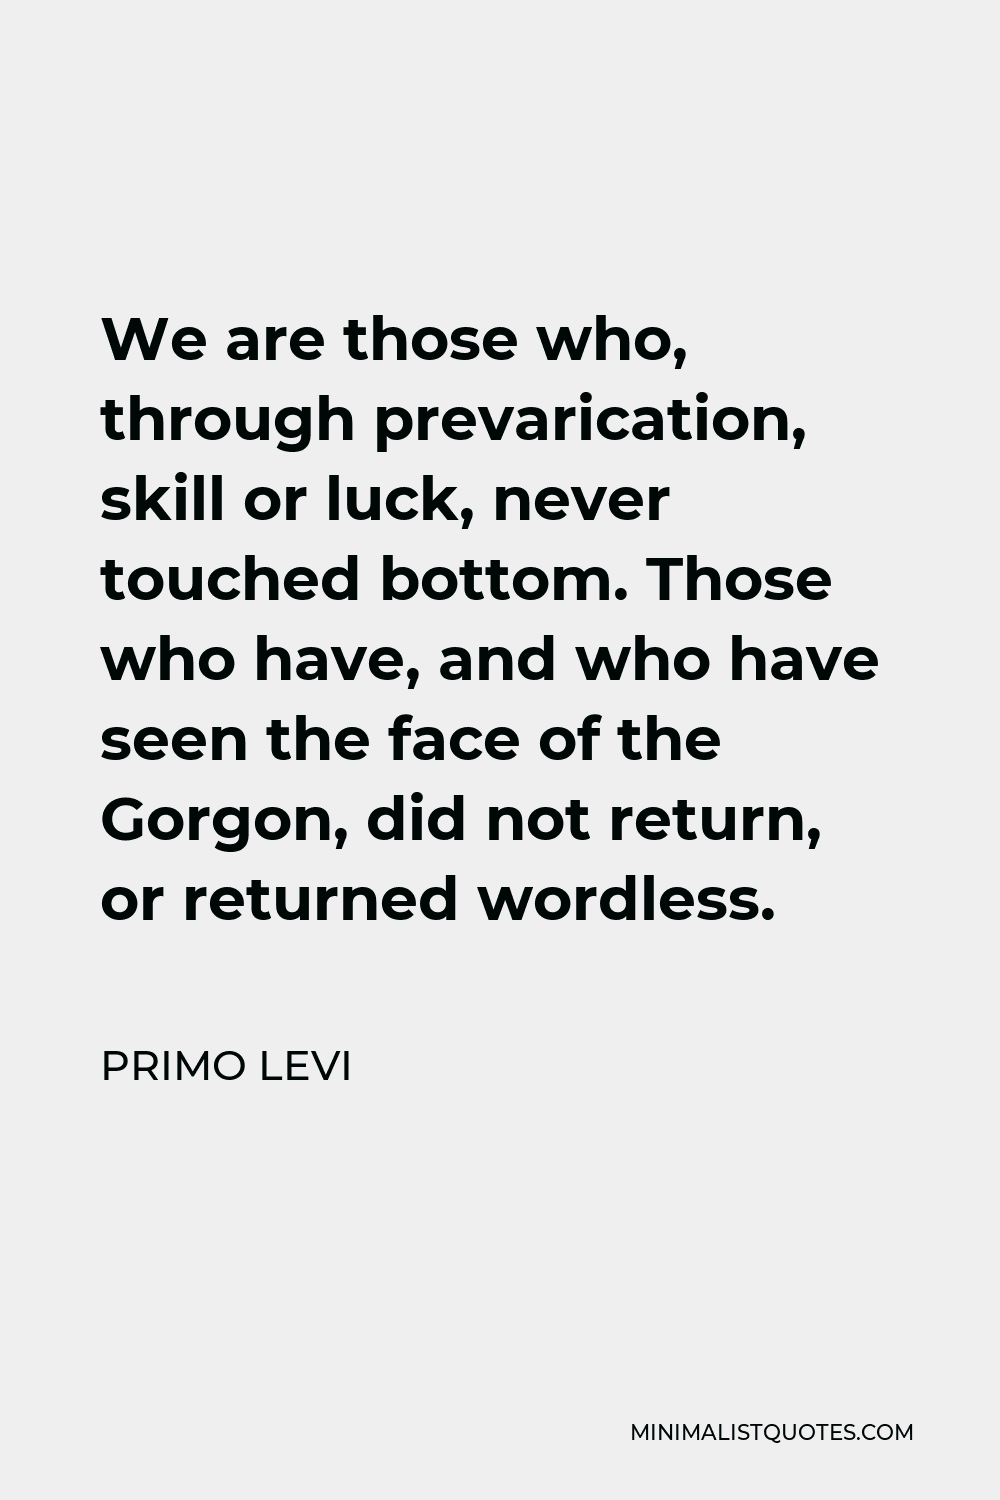 Primo Levi Quote - We are those who, through prevarication, skill or luck, never touched bottom. Those who have, and who have seen the face of the Gorgon, did not return, or returned wordless.